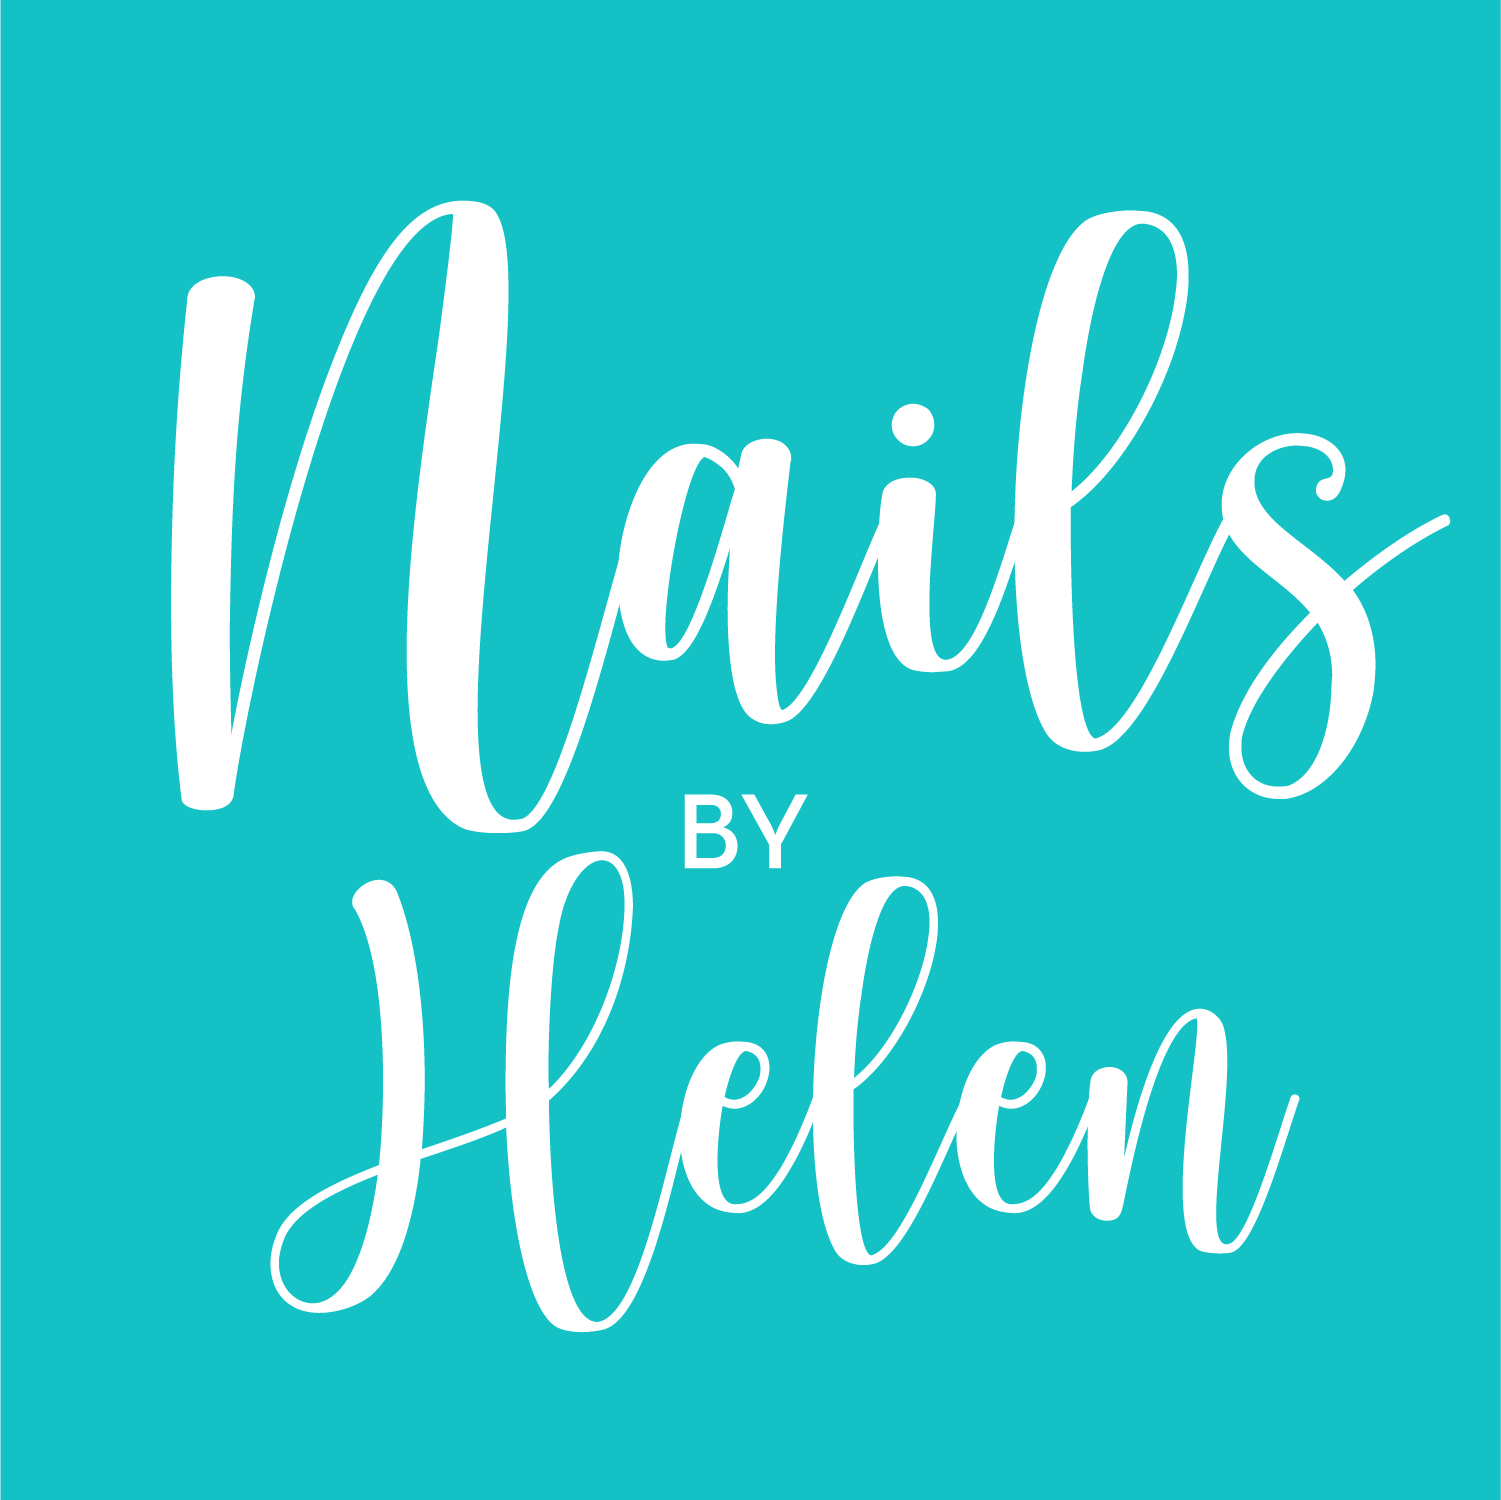 Nails by Helen – Discover beautiful nails today